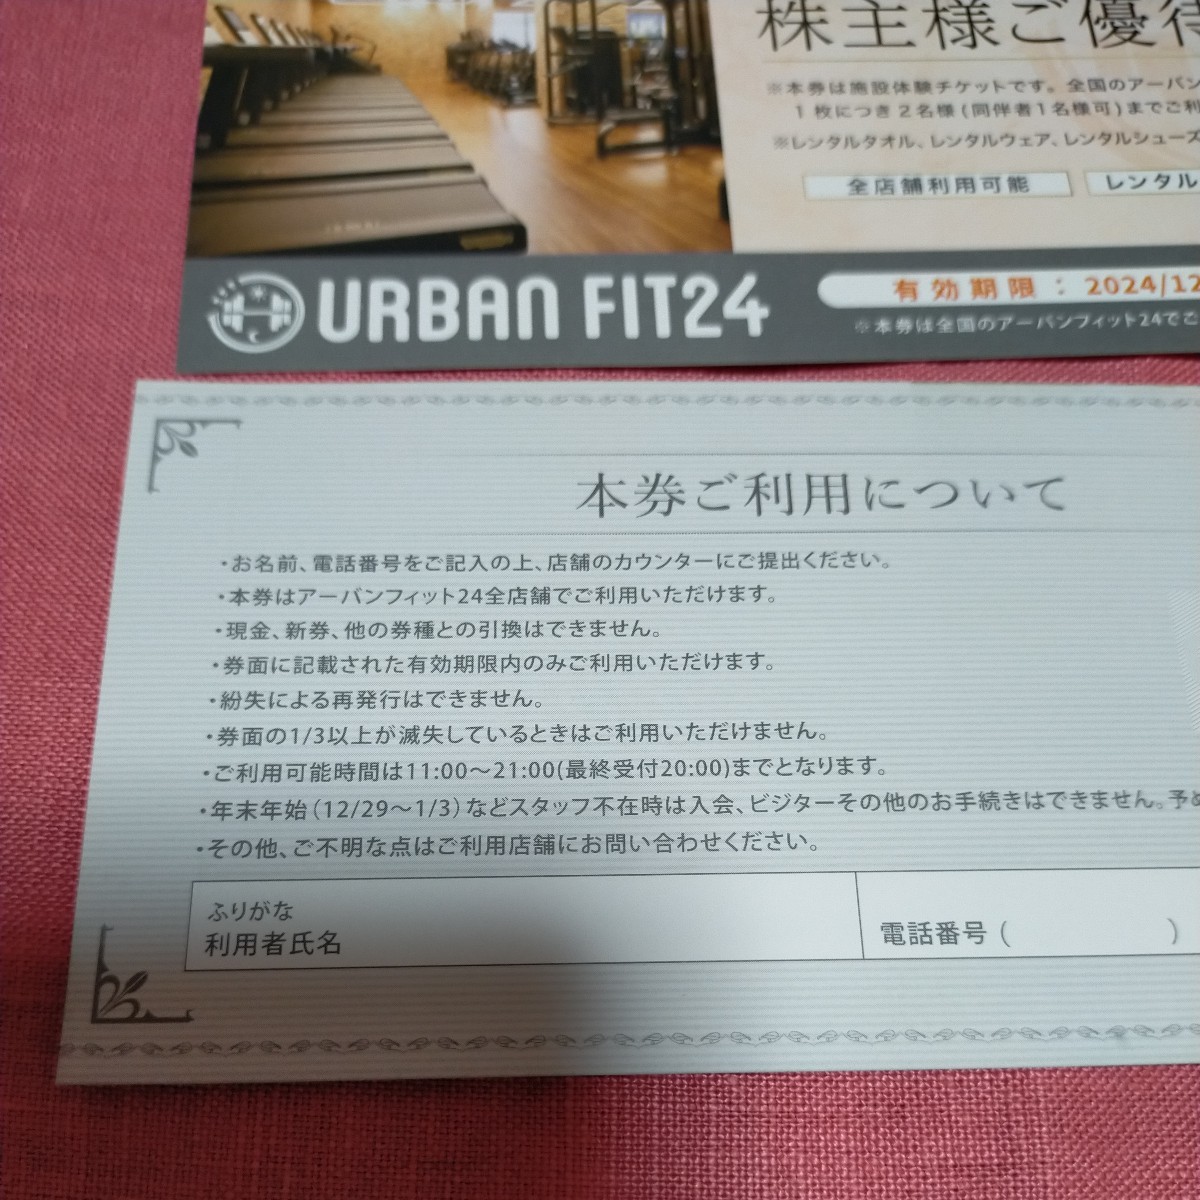  newest urban Fit 24 facility body . ticket 2 sheets free shipping urbanfit24